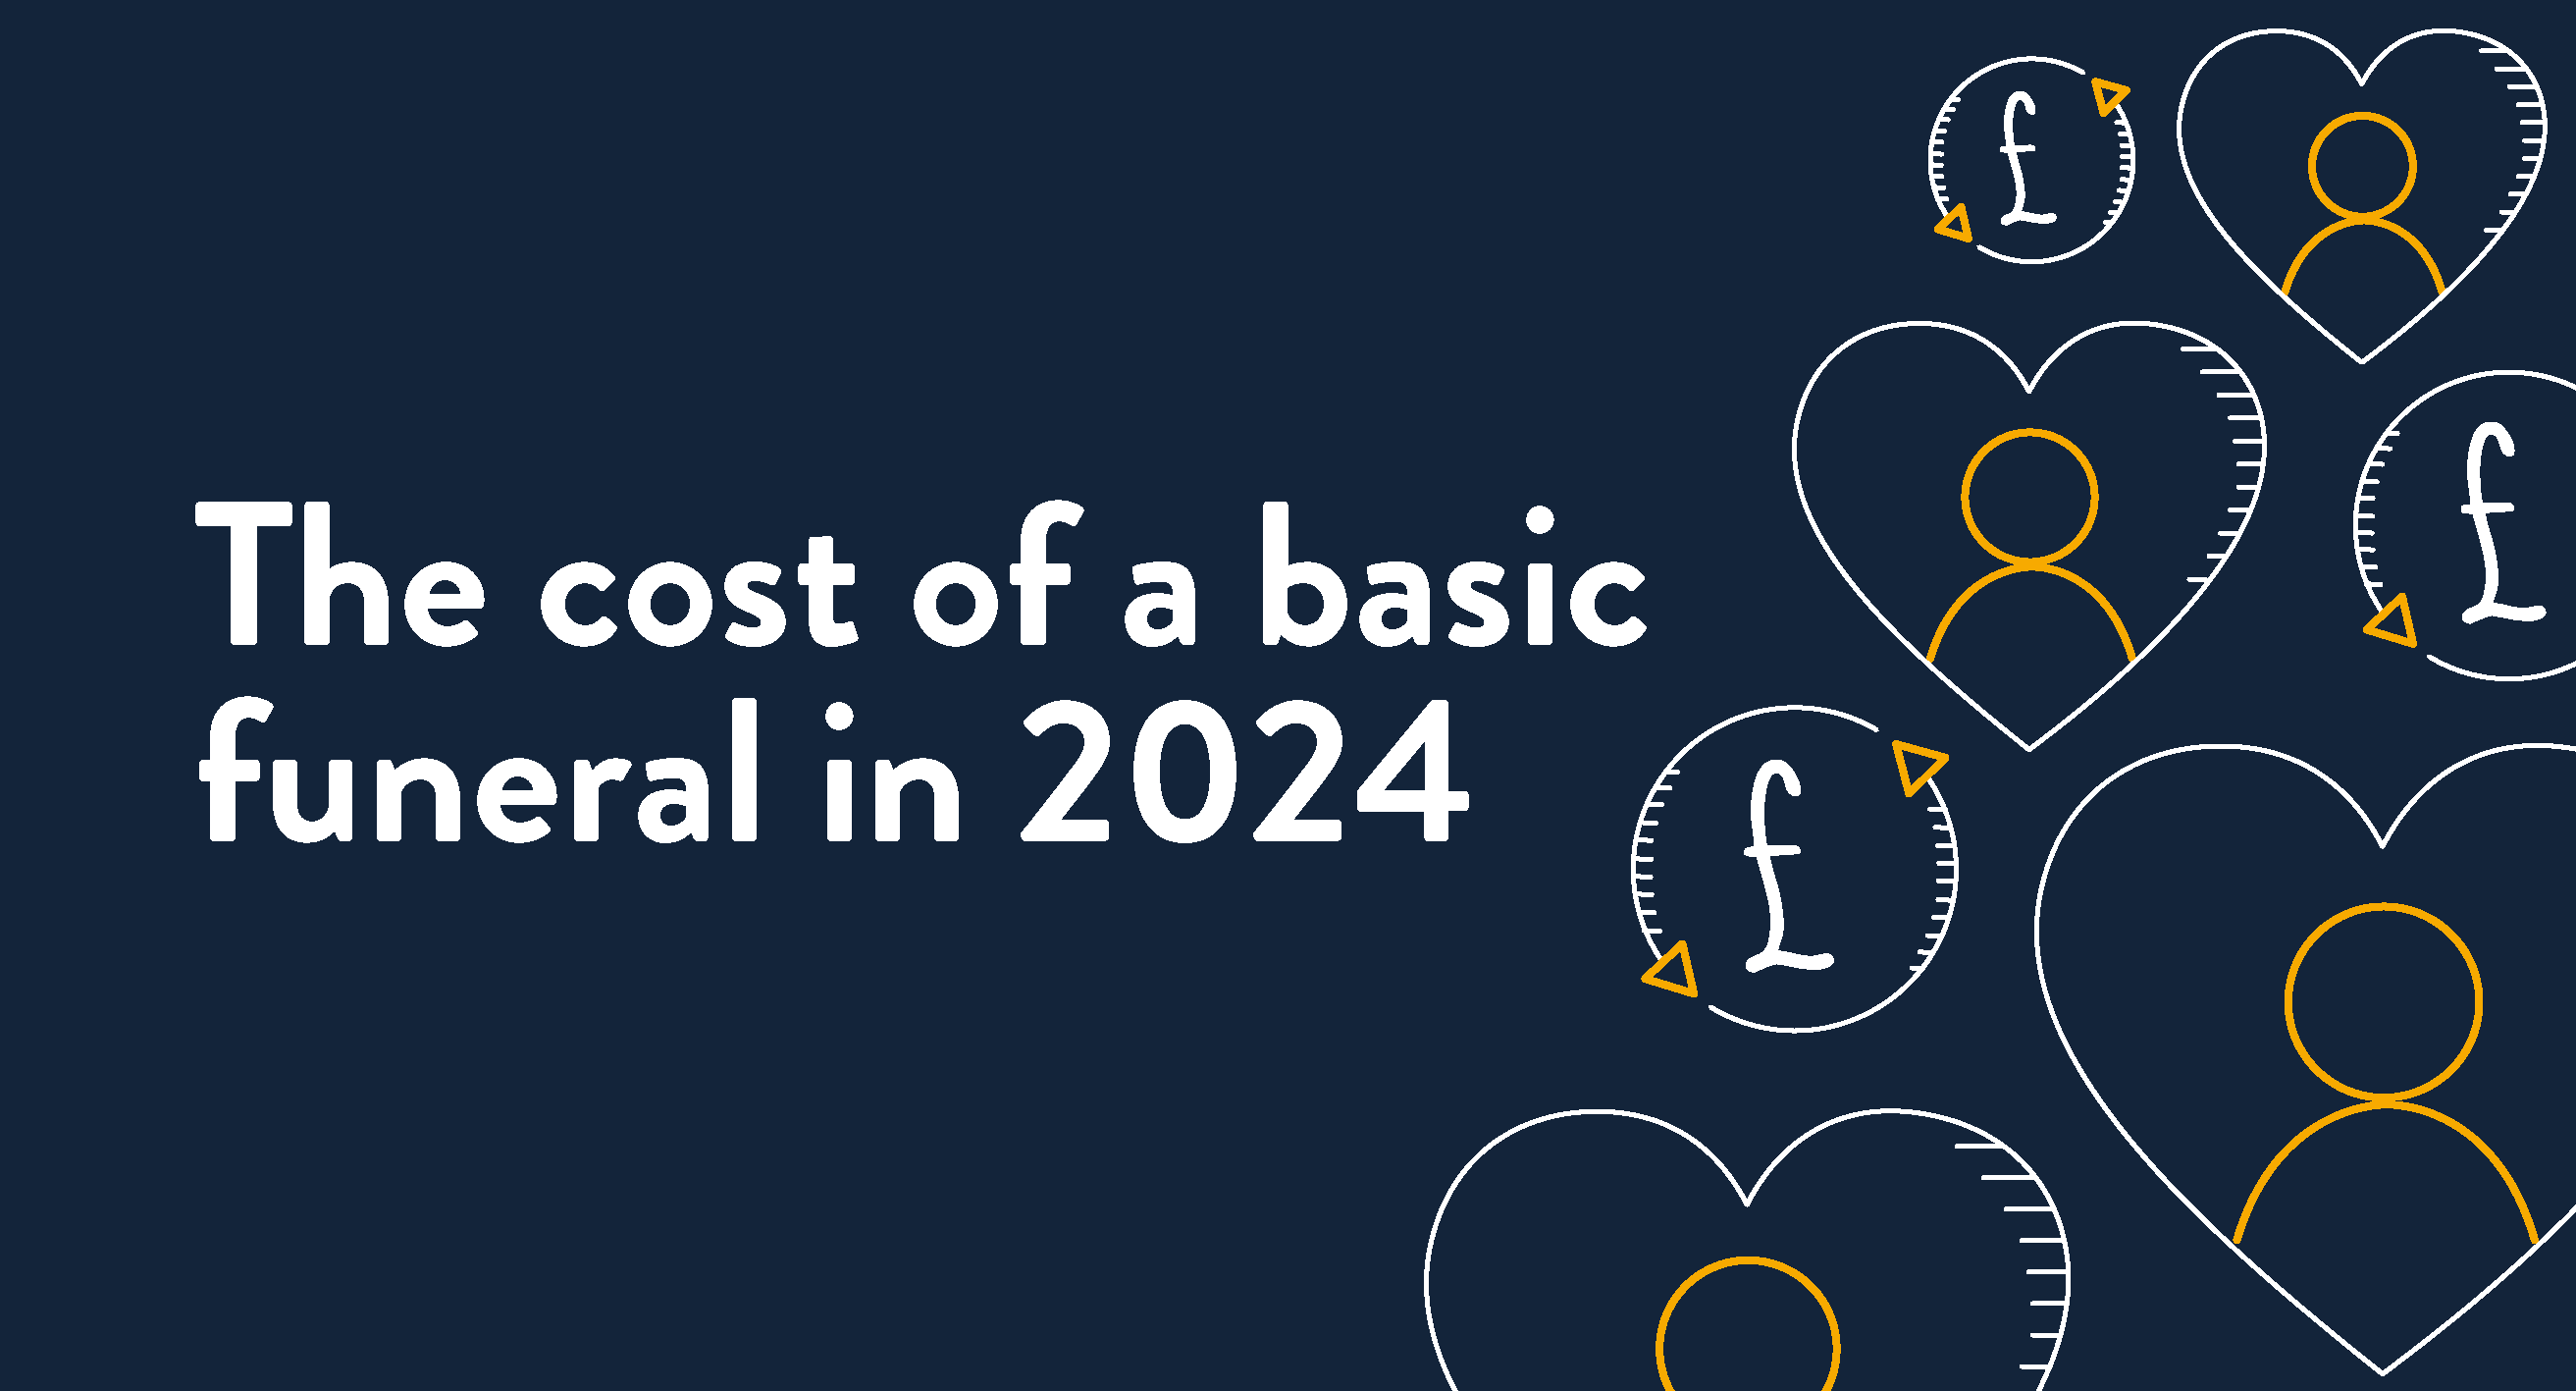 The cost of a basic funeral in 2024